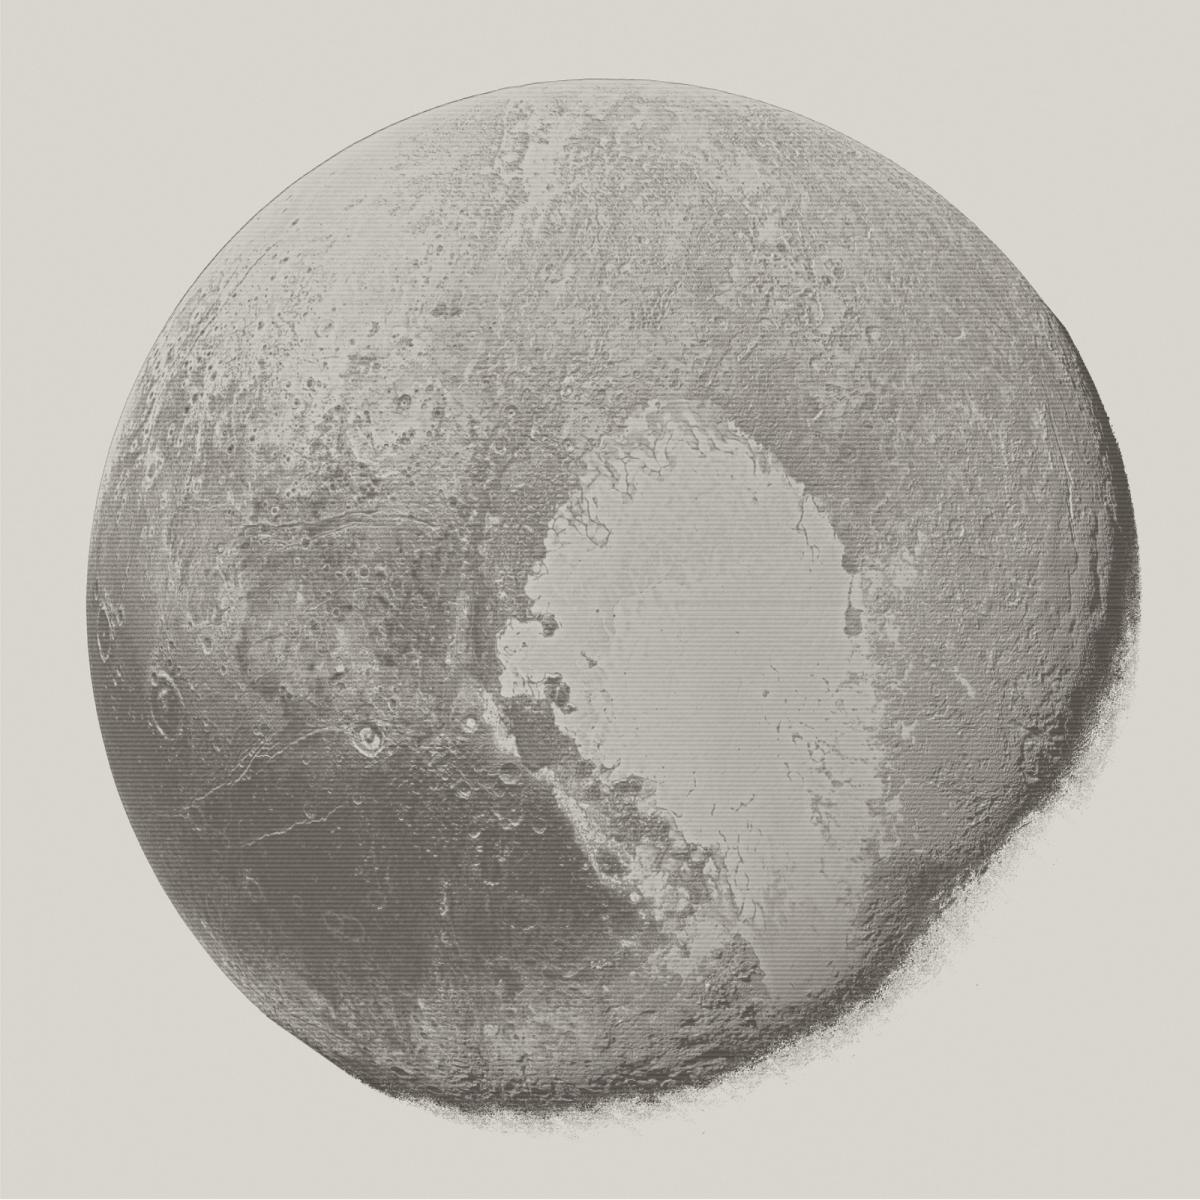 A dull colored, stylized image of the New Horizons Pluto image.